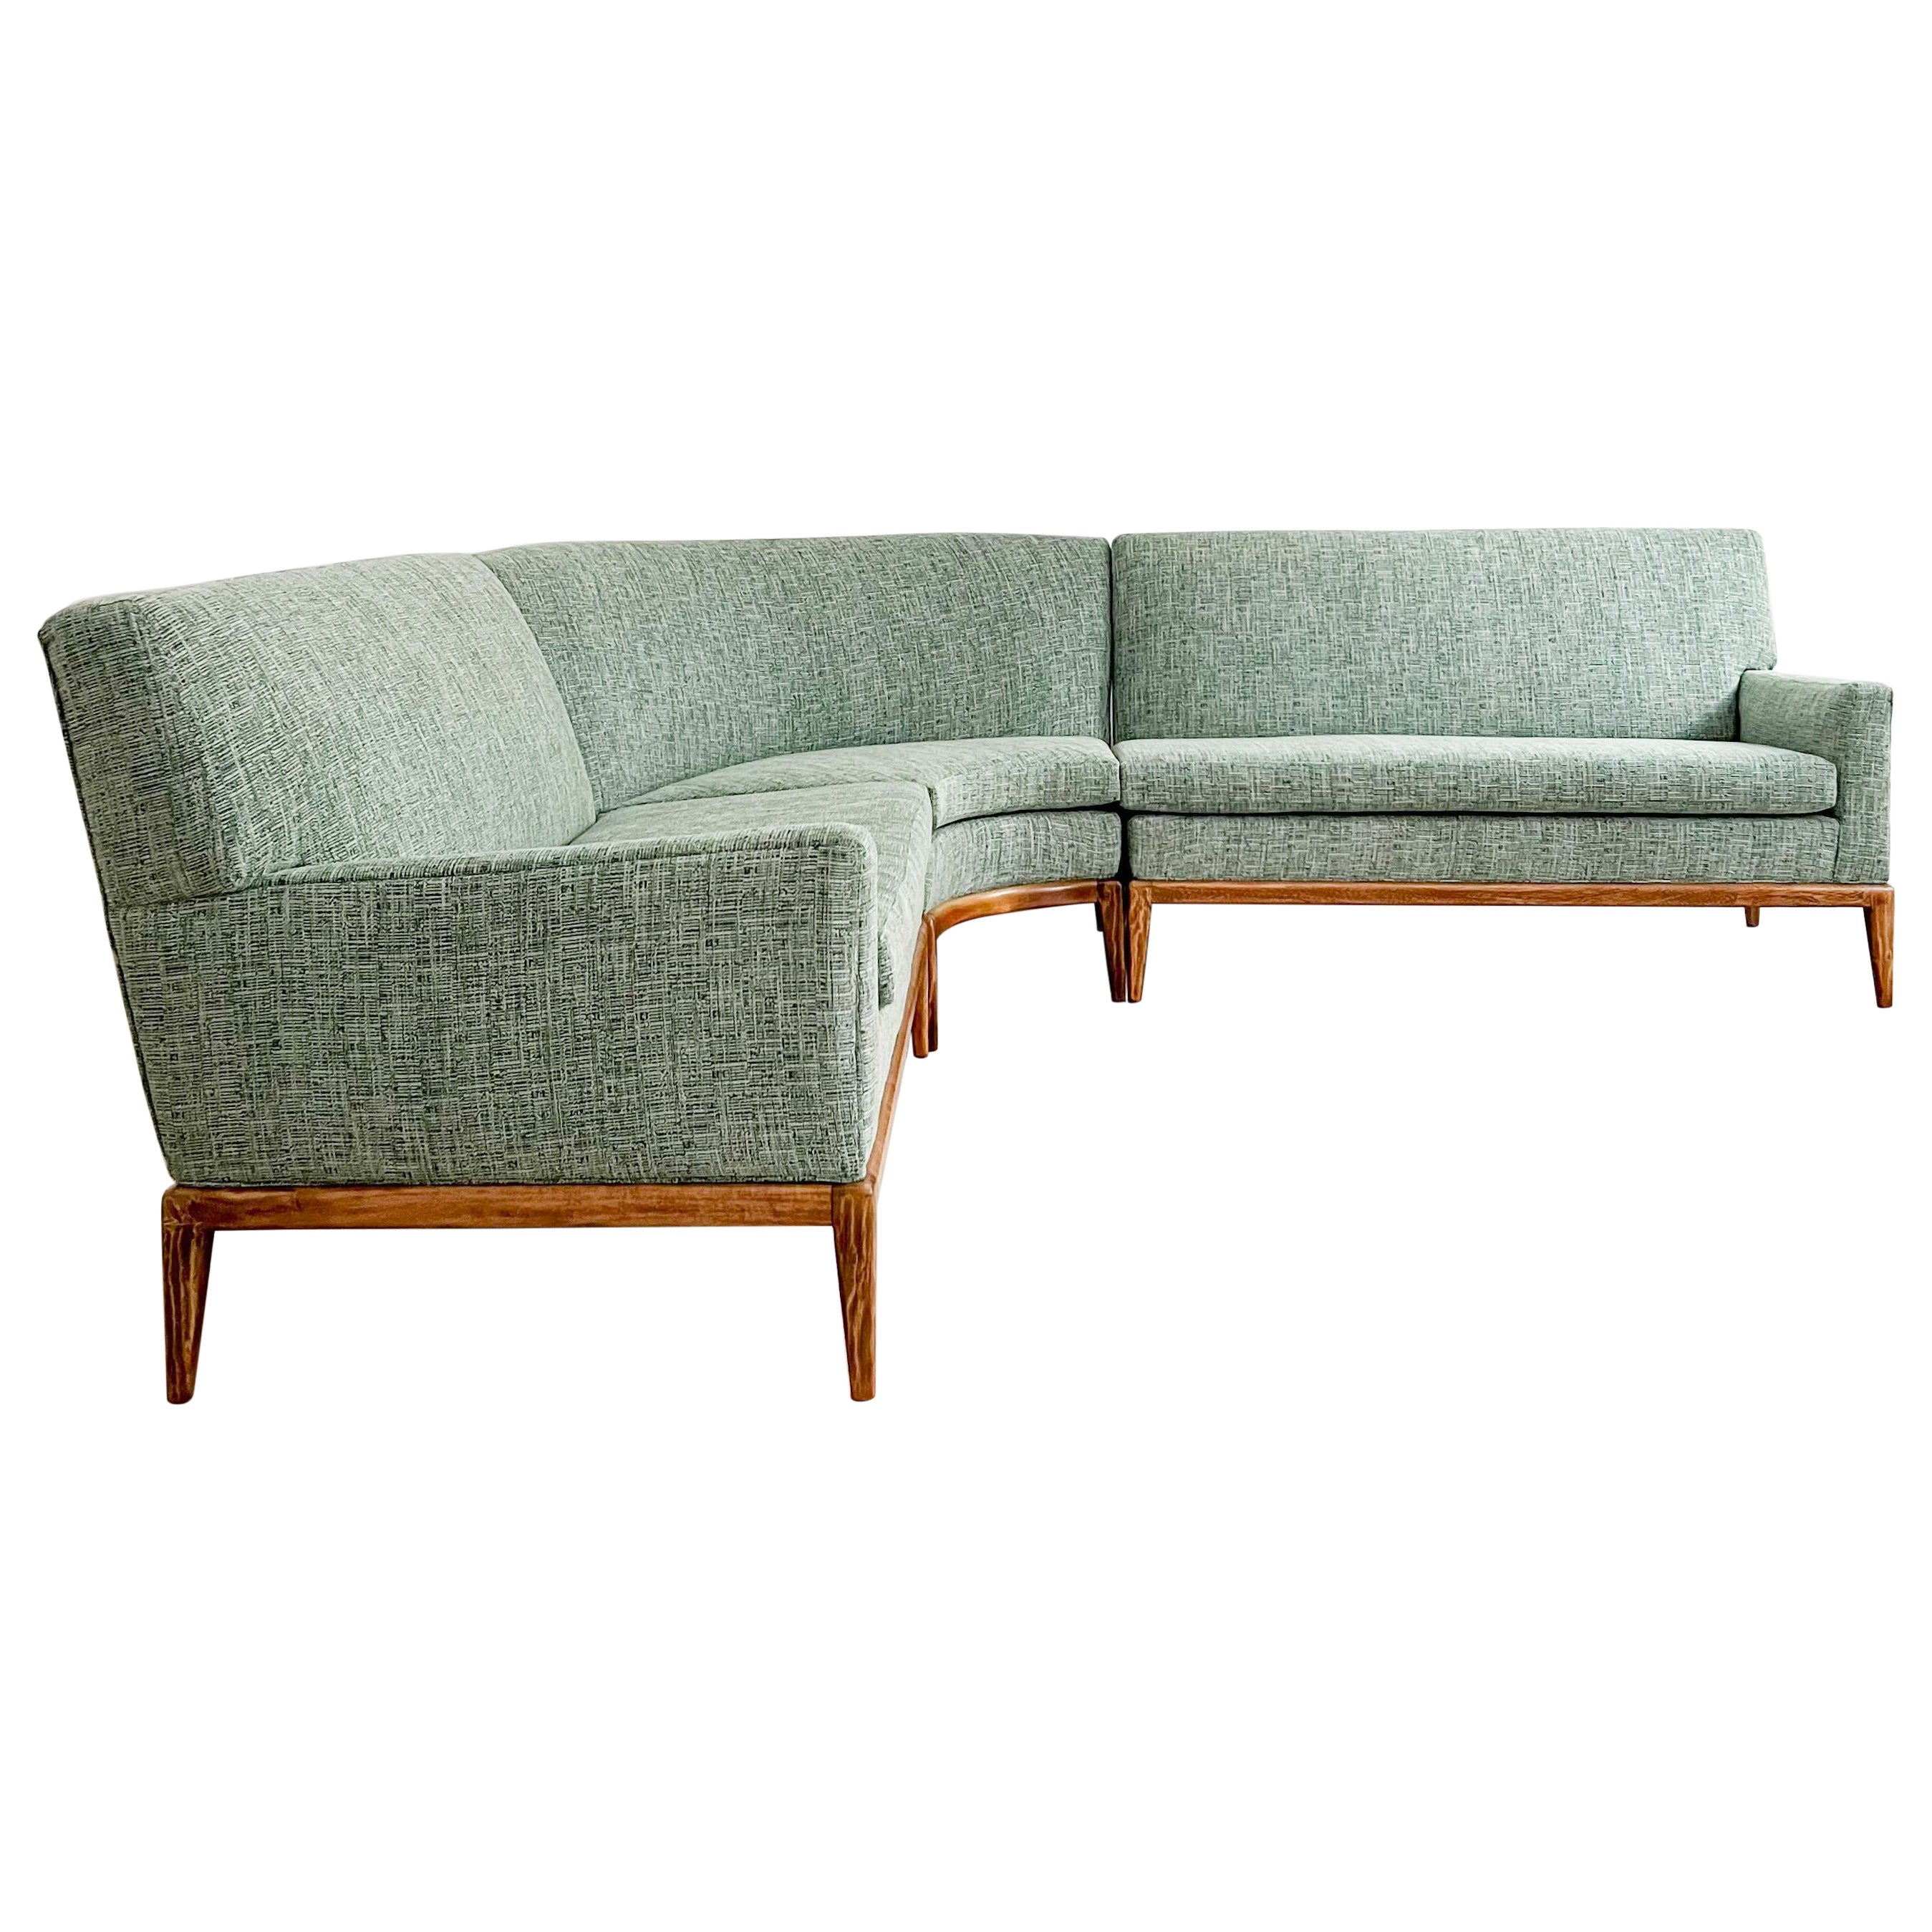 Mid-Century 3 Part Curved Sectional Sofa, New Light Teal Upholstery, Wood Base